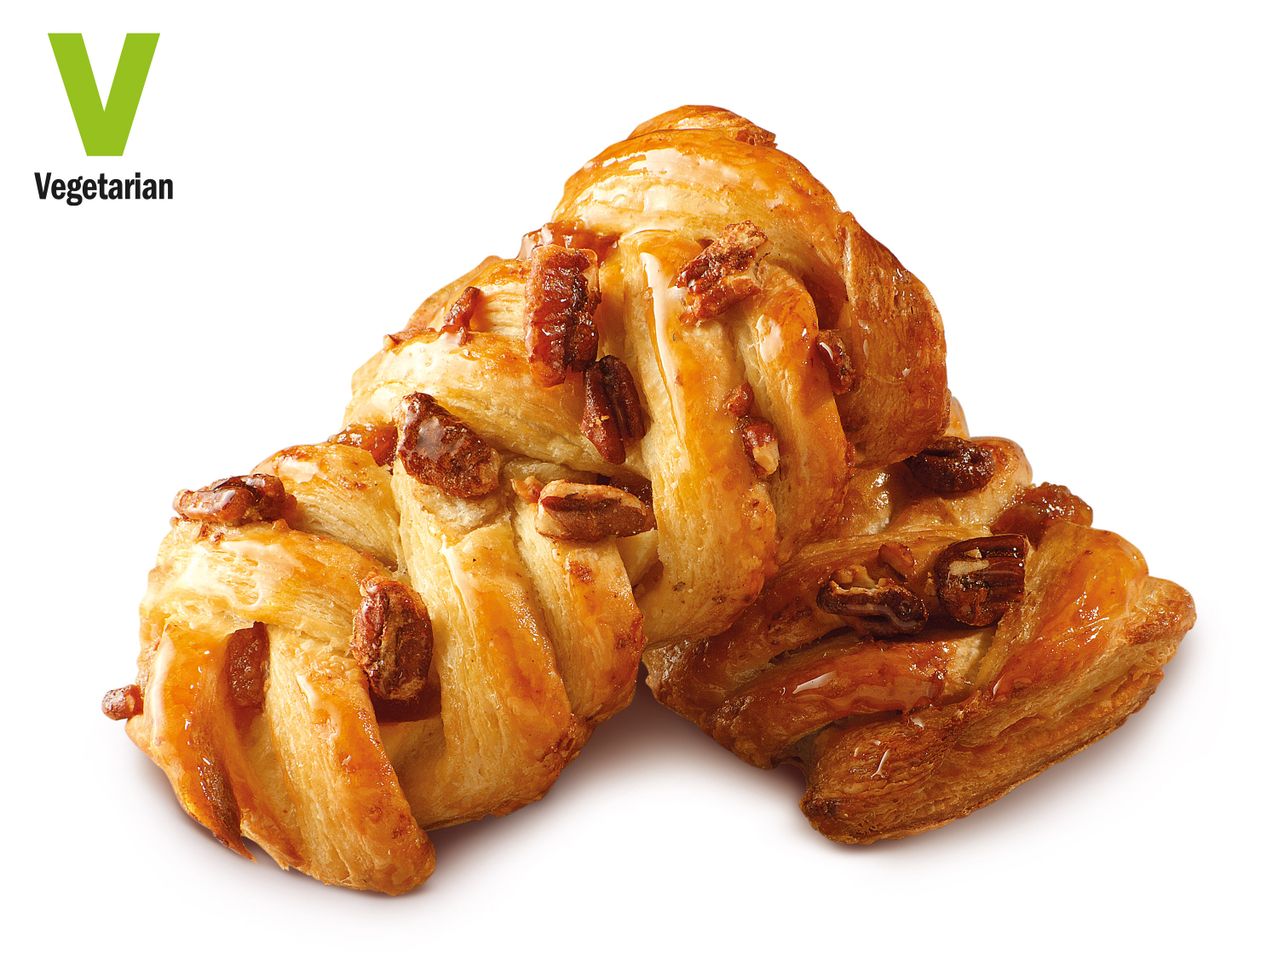 Go to full screen view: Maple and Pecan Plait - Image 1